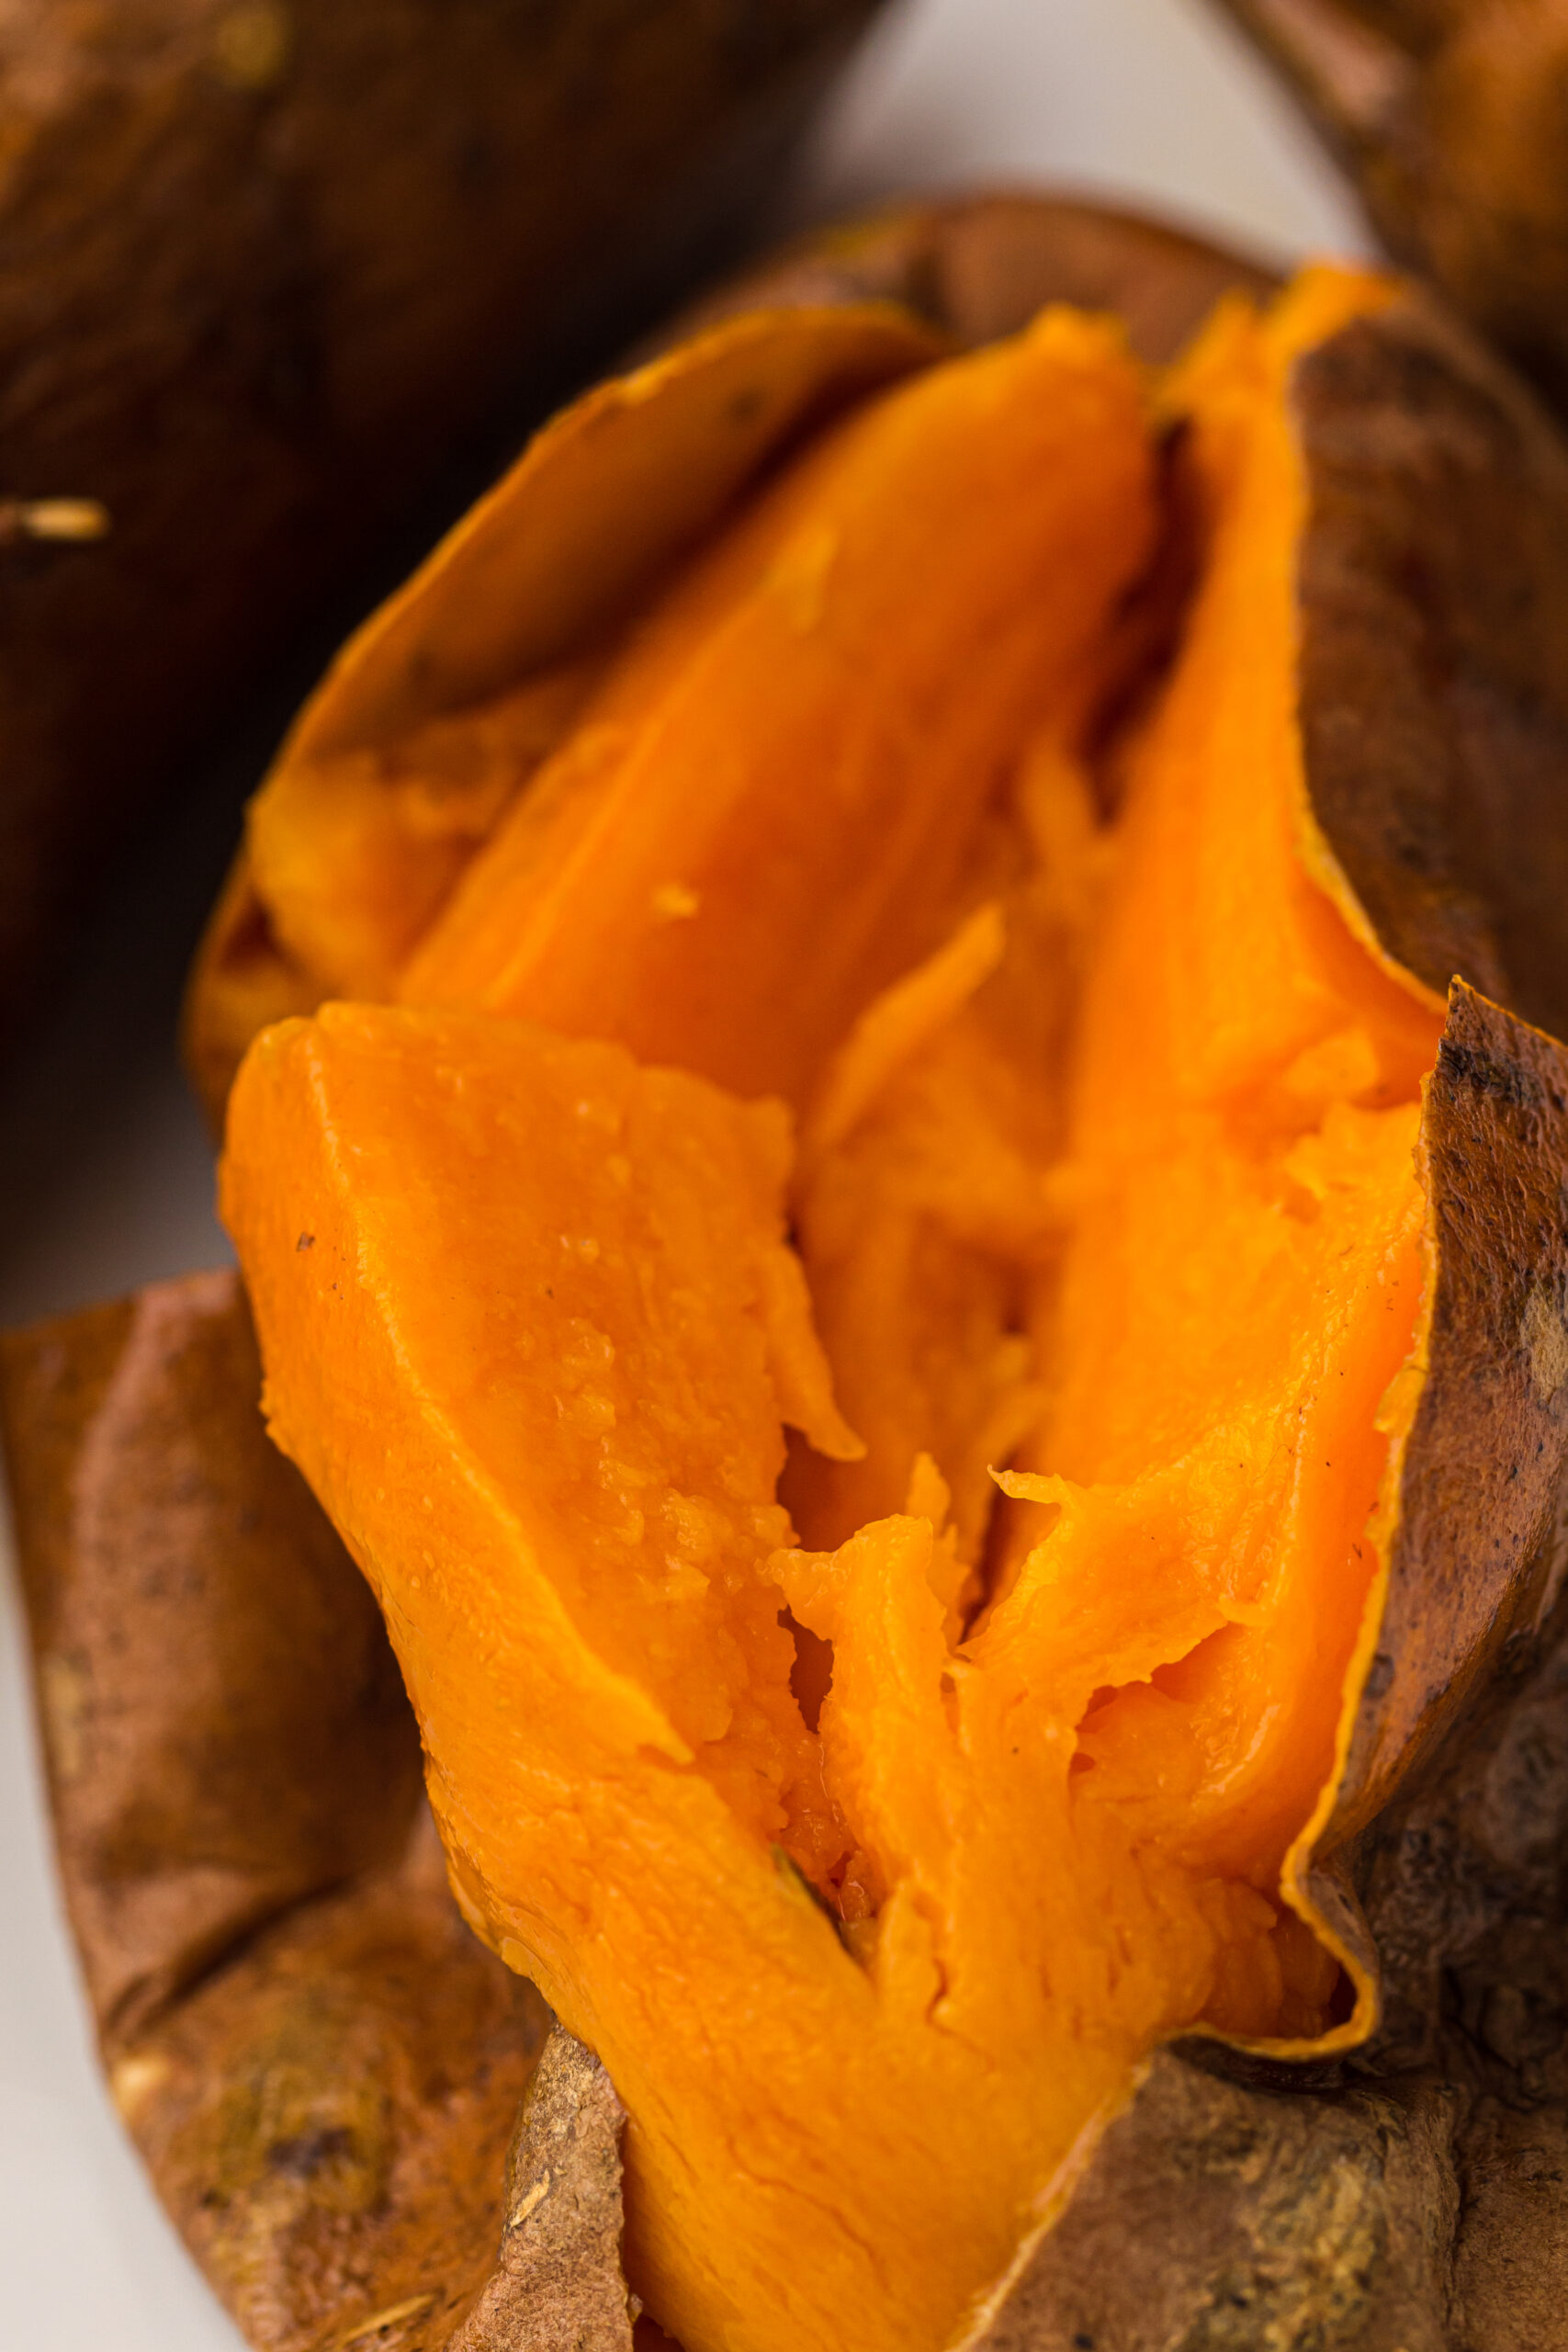 FAQ 1: How to Reheat Baked Sweet Potato? A: To reheat baked sweet potatoes, there are several methods you can use. One popular method is to preheat the oven to 400°F (200°C), place the sweet potatoes on a baking sheet, and bake them for 10-15 minutes or until they are heated through and crispy on the outside[^1^][^2^]. Another option is to use a microwave by placing the sweet potatoes on a microwave-safe plate, piercing them with a fork, covering the plate with a damp paper towel, and microwaving them on high for 2-4 minutes[^3^]. Additionally, if you have an air fryer, you can reheat the sweet potatoes at 375°F (190°C) for 5-7 minutes, or until heated through and the skin becomes crispy[^4^]. FAQ 2: How Long to Reheat Baked Sweet Potato in the Microwave? A: The time needed to reheat baked sweet potatoes in the microwave can vary depending on the size and quantity of the potatoes. As a general guideline, it usually takes about 2-4 minutes on high heat to achieve the desired level of warmth. However, it's important to check the temperature and adjust the cooking time accordingly to avoid overcooking[^3^]. FAQ 3: How to Reheat a Baked Sweet Potato? A: Reheating a baked sweet potato is simple. You can follow the same steps as reheating regular baked potatoes. Preheat your oven to 400°F (200°C), place the sweet potato on a baking sheet, and bake for approximately 10-15 minutes or until heated through and crispy. You can also use a microwave by placing the sweet potato on a microwave-safe plate, piercing it with a fork, covering it with a damp paper towel, and microwaving on high for 2-4 minutes[^1^][^2^][^3^]. FAQ 4: How to Reheat Baked Sweet Potatoes? A: There are a few methods you can use to reheat baked sweet potatoes. One option is to preheat your oven to 400°F (200°C), place the sweet potatoes on a baking sheet, and bake them for 10-15 minutes or until heated through and crispy. Another method is to use a microwave by placing the sweet potatoes on a microwave-safe plate, covering them with a damp paper towel, and microwaving on high for 2-4 minutes. You can also use an air fryer by preheating it to 375°F (190°C), placing the sweet potatoes in the basket, and cooking for 5-7 minutes until heated through and crispy[^1^][^2^][^3^][^4^]. FAQ 5: How Best to Reheat Baked Sweet Potato in Oven? A: The best way to reheat baked sweet potatoes in the oven is to preheat it to a high temperature, such as 400°F (200°C). Place the sweet potatoes on a baking sheet and bake them for about 10-15 minutes or until they are heated through and the skin becomes slightly crispy. This method helps retain the original texture and flavor of the sweet potatoes[^1^][^5^]. FAQ 6: How to Reheat Baked Korean Sweet Potato? A: To reheat baked Korean sweet potatoes, you can follow the same methods mentioned earlier. Whether you choose to use the oven, microwave, or air fryer, the process remains the same. Preheat the oven or appliance of your choice, place the baked Korean sweet potatoes, and heat until warmed through. Adjust the cooking time according to the size and thickness of the potatoes, ensuring they are heated evenly[^1^][^2^][^3^][^4^]. FAQ 7: How to Reheat Baked Sweet Potato Casserole in Microwave? A: If you have leftover baked sweet potato casserole and want to reheat it quickly, using a microwave is a convenient option. Transfer the sweet potato casserole to a microwave-safe dish, cover it with a microwave-safe lid or wrap it with microwave-safe plastic wrap, and heat on high for 2-4 minutes until it is heated through. Use oven mitts or kitchen towels to handle the hot dish when removing it from the microwave[^3^]. FAQ 8: How to Reheat Baked Sweet Potato Fries? how to reheat a sweet Potatoe